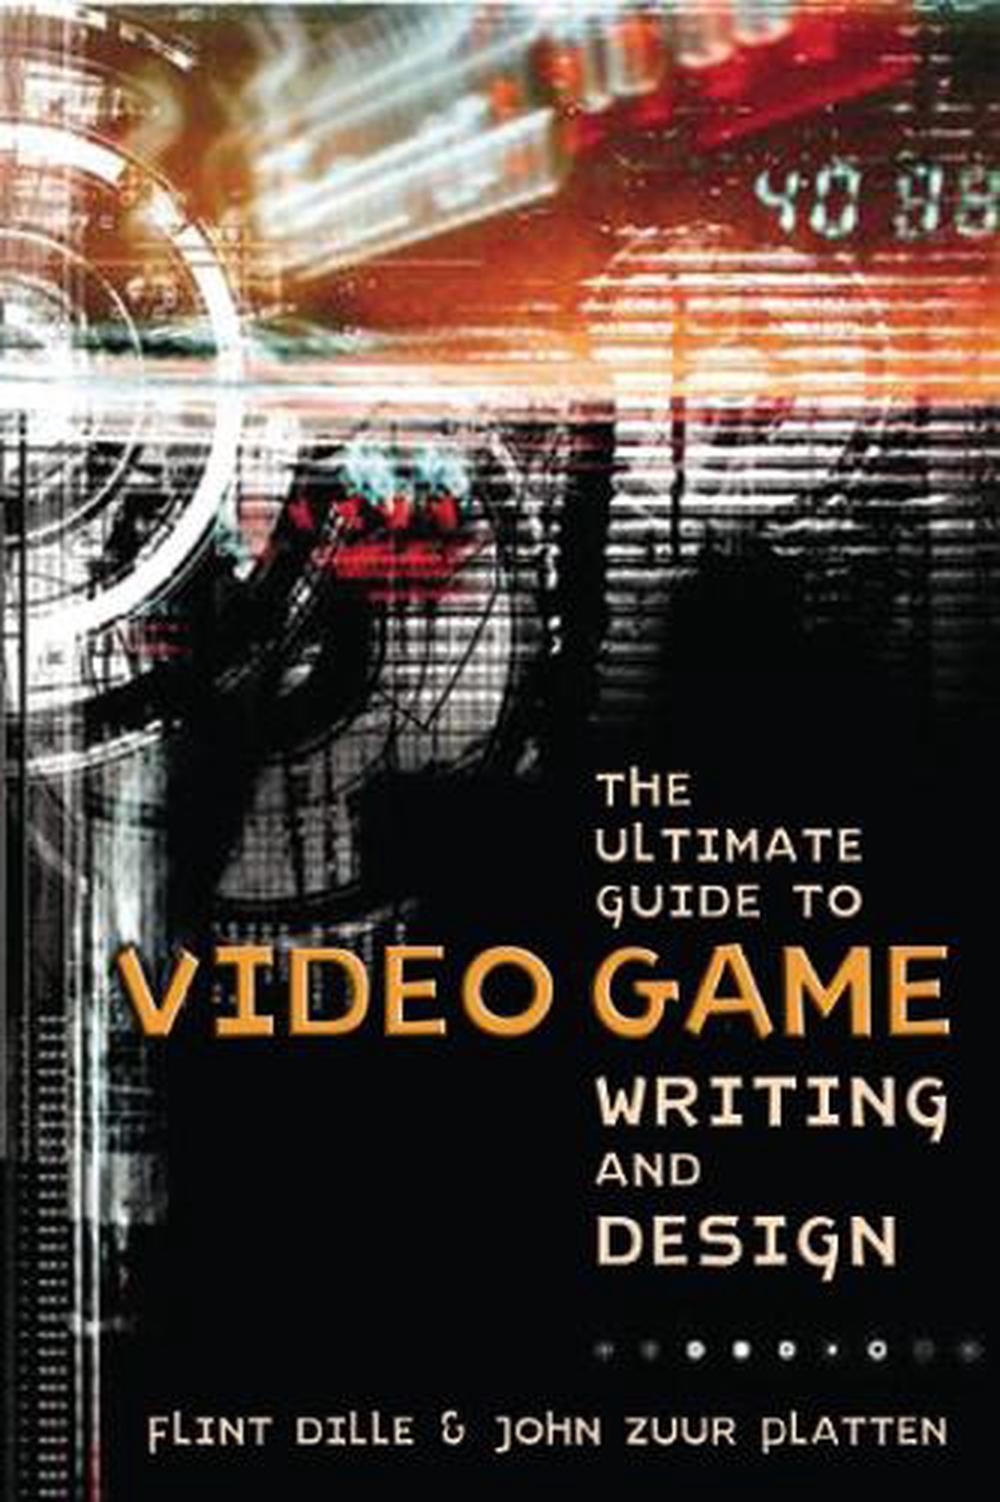 The Ultimate Guide To Video Game Writing And Design By Flint Dille Paperback 9781580650663 Buy Online At The Nile - the ultimate guide to roblox coding games development